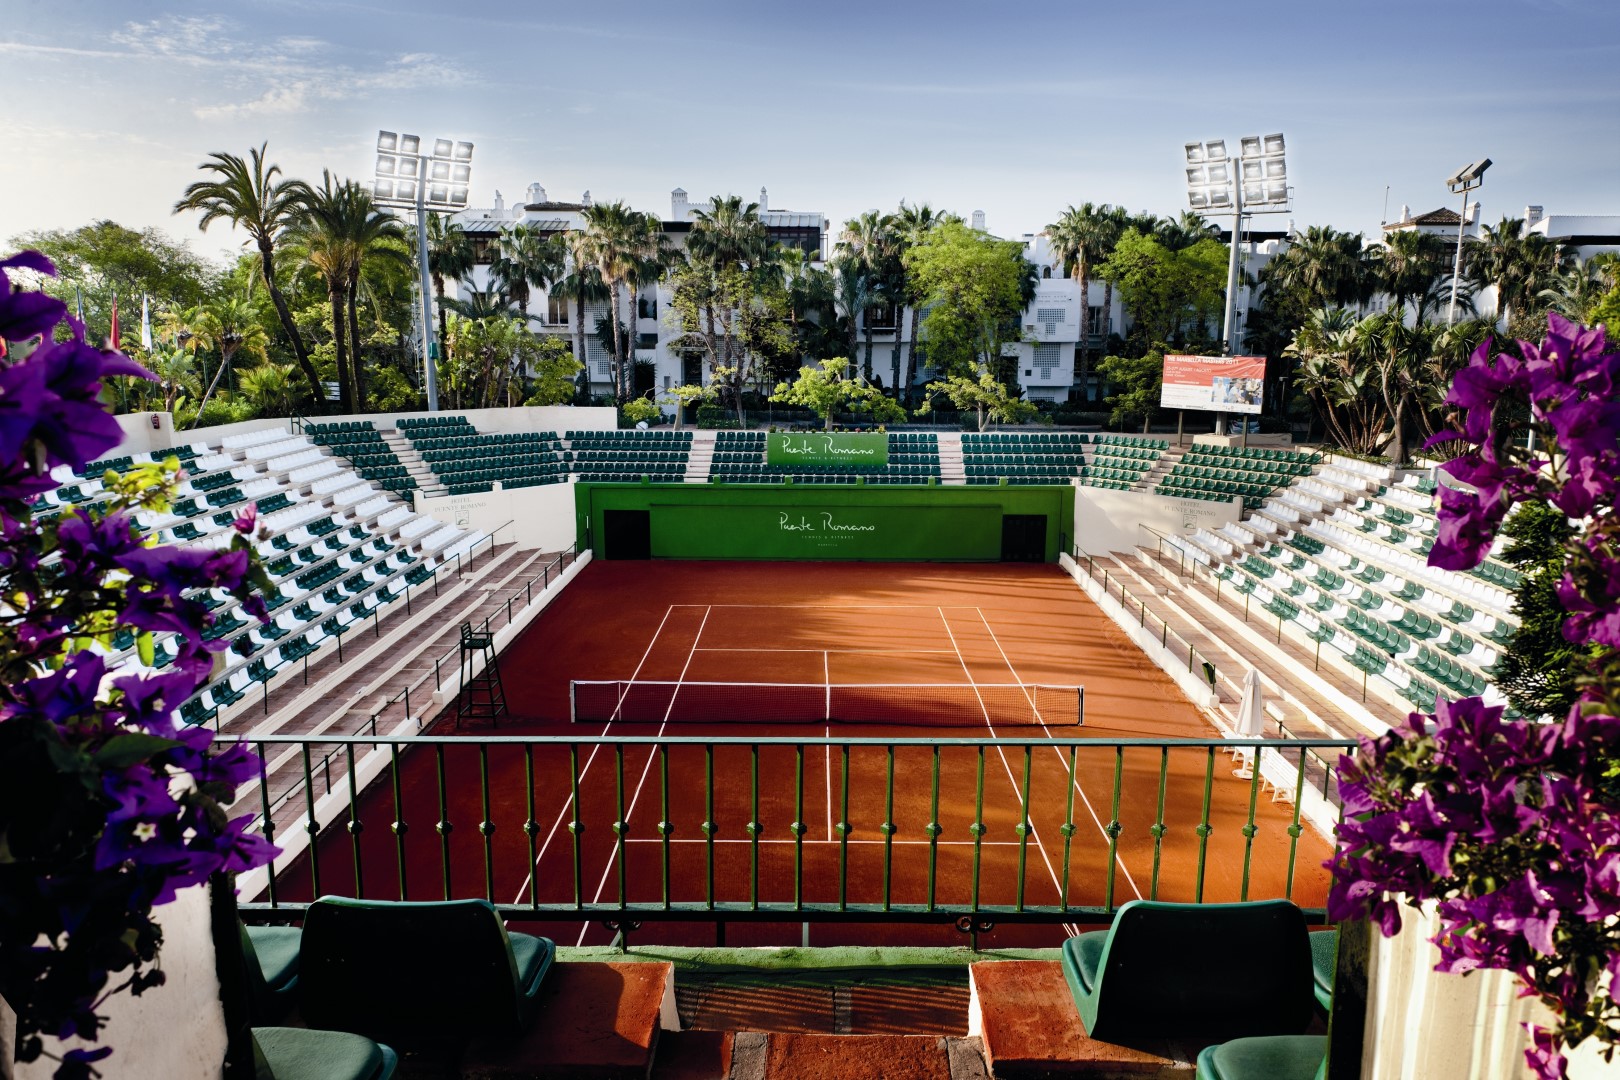 Tennis stars align in Marbella for exciting Senior Masters Cup 2018